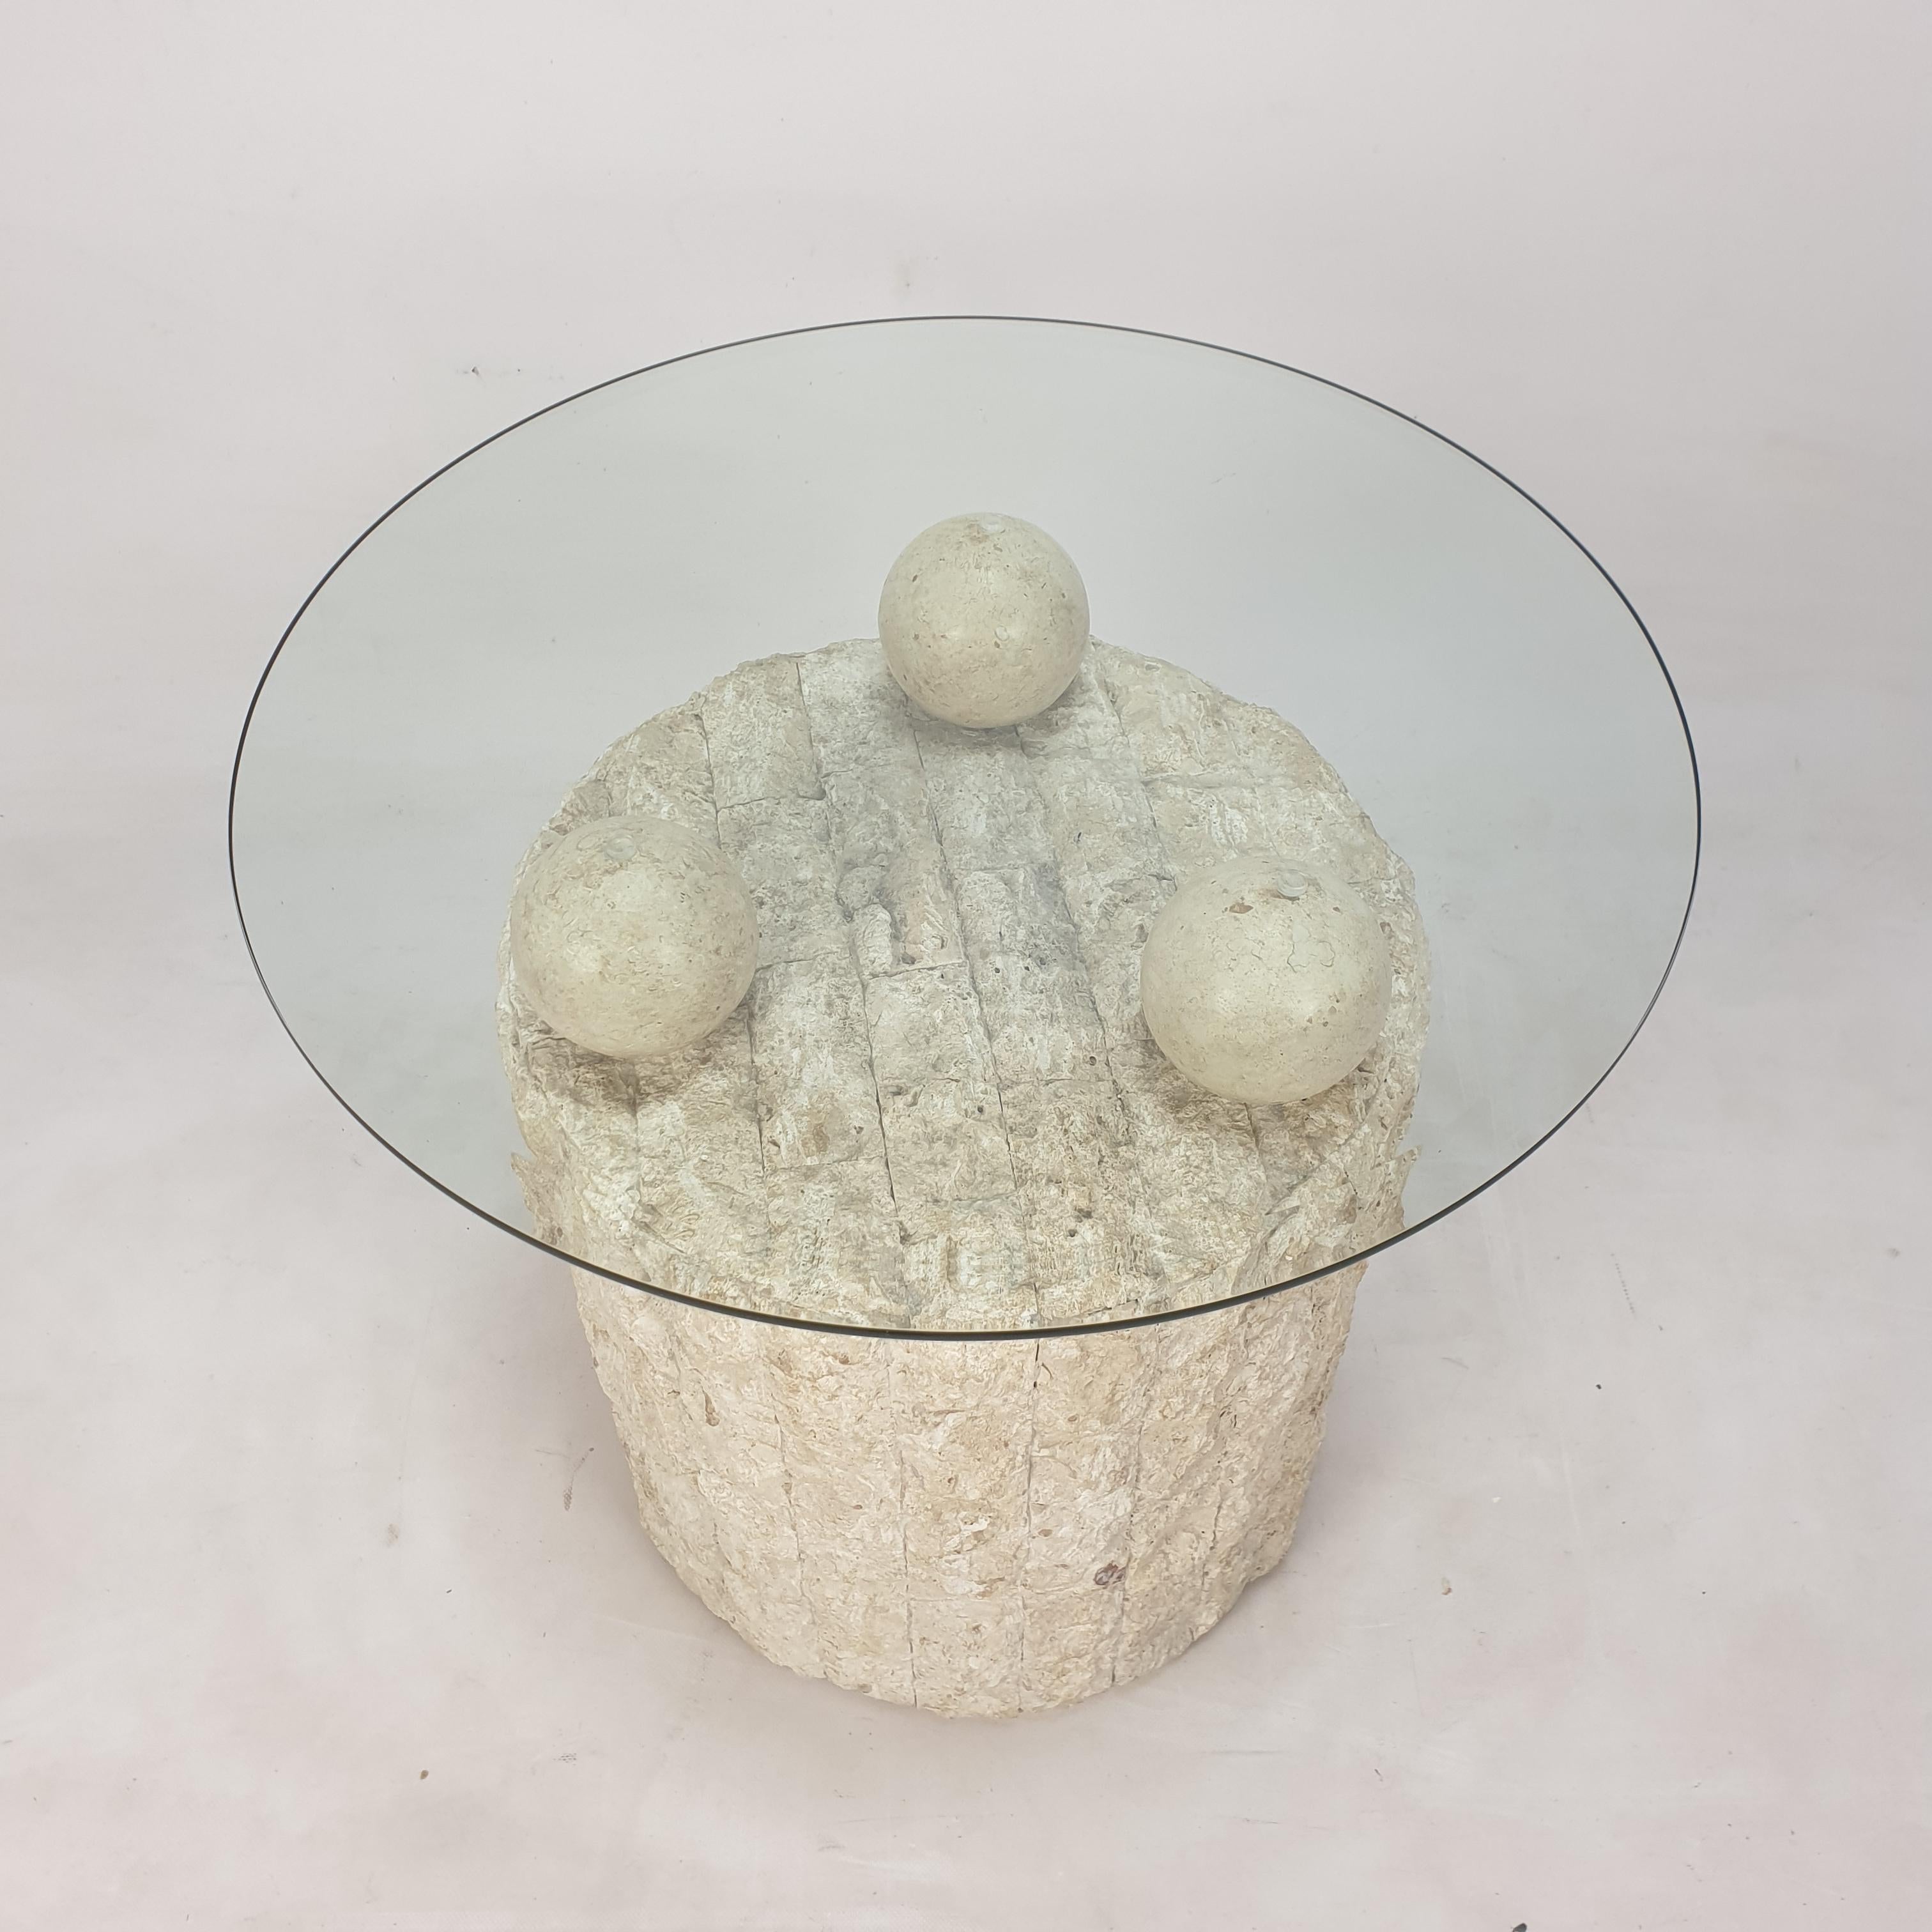 Hand-Crafted Magnussen Ponte Mactan Stone Coffee or Fossil Stone Table, 1980s